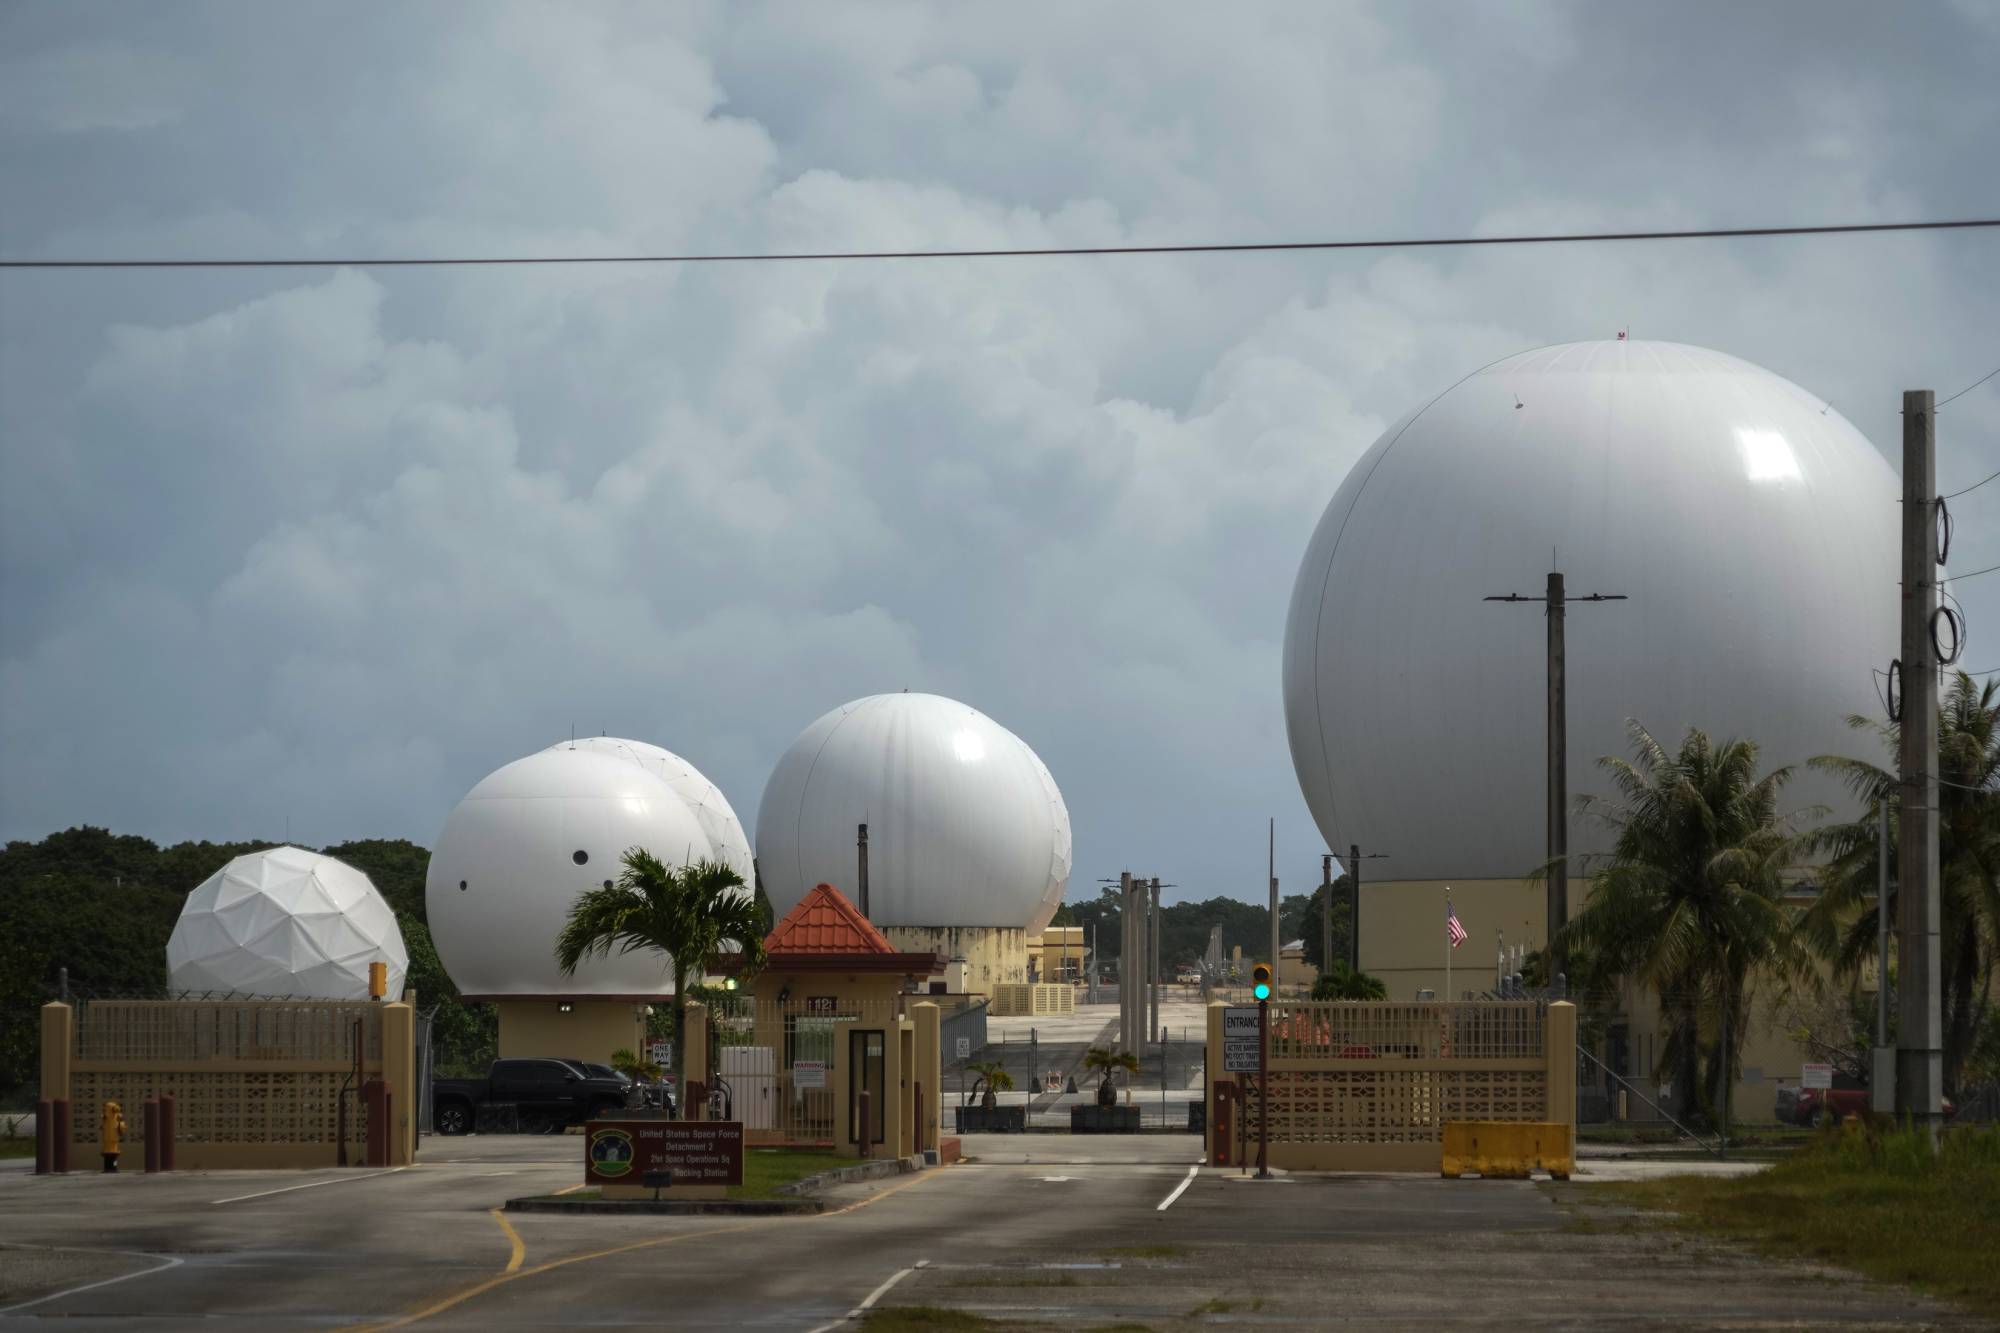 The Guam Remote Ground Terminal at Andersen Air Force Base on Feb. 17. The site does satellite surveillance in the region. | CHANG W. LEE / THE NEW YORK TIMES